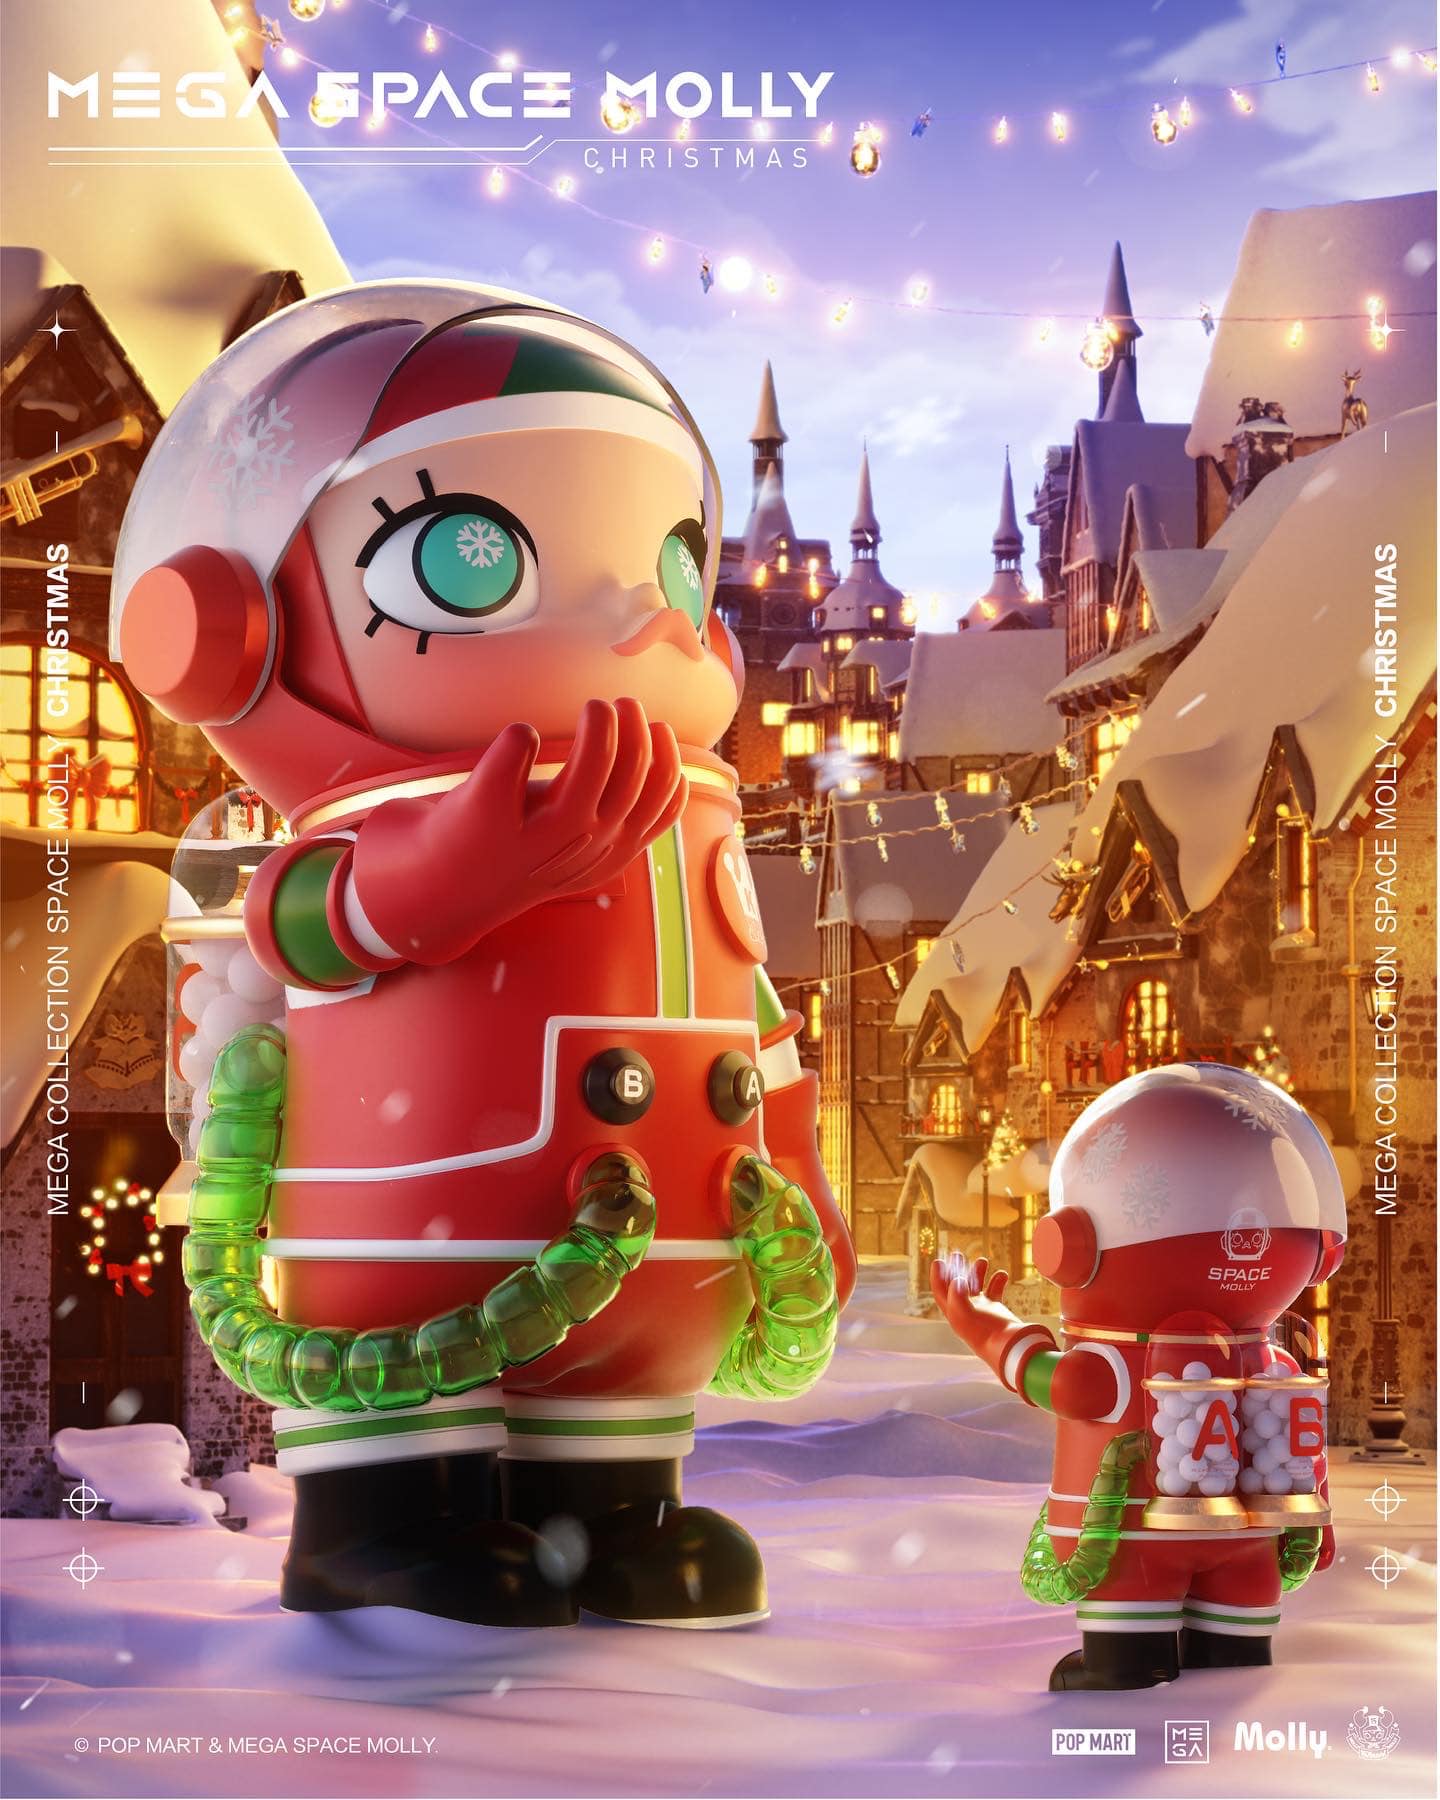 POP MART x Kenny Wong's Mega Space Molly: Christmas - The Toy 